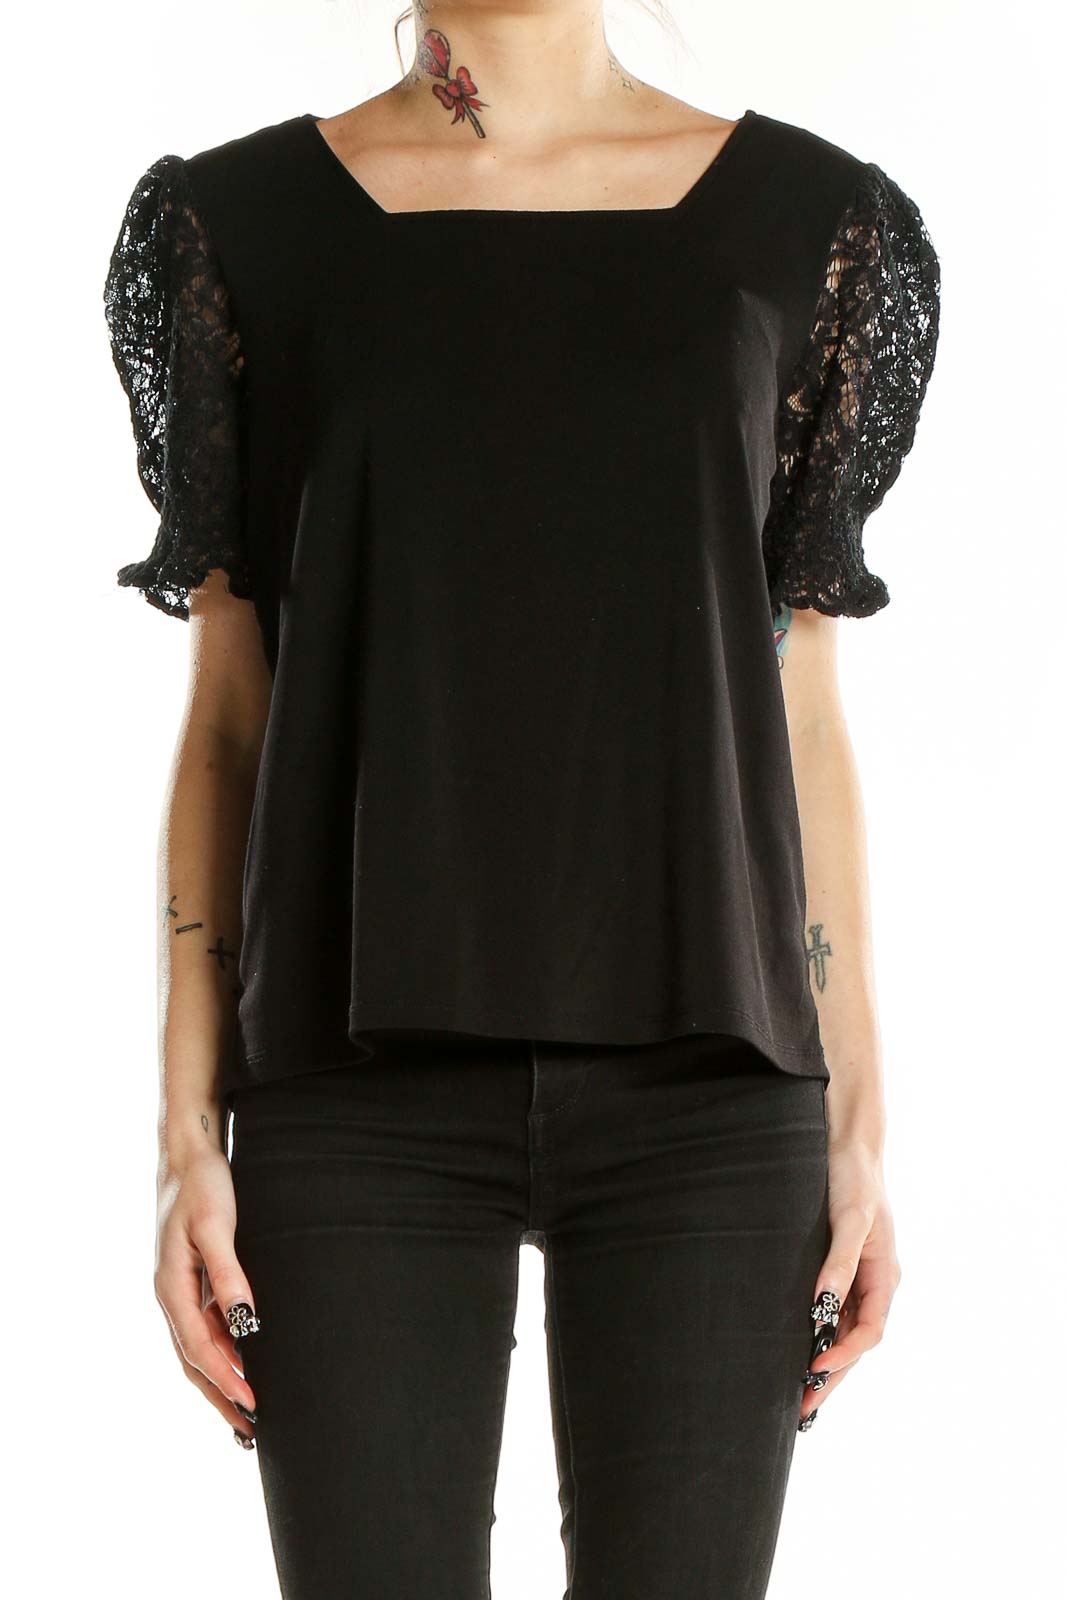 Black Square Neck Lace Sleeve Top Front